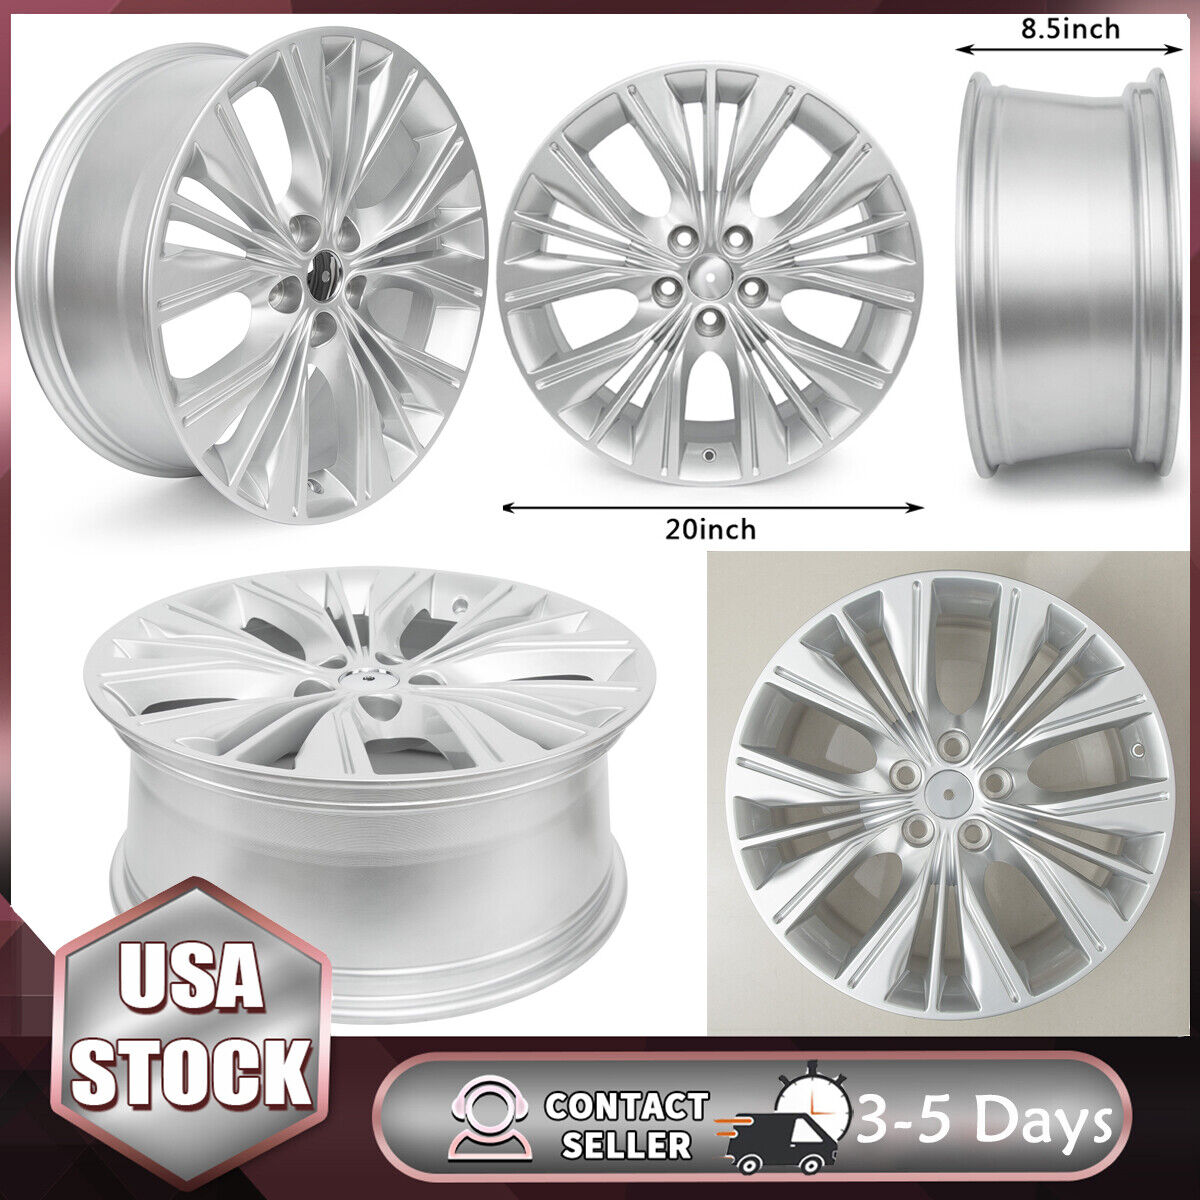 New 20 X 8.5 inch Replacement Rim Wheel Silver for Chevrolet Impala 2014-2020 US